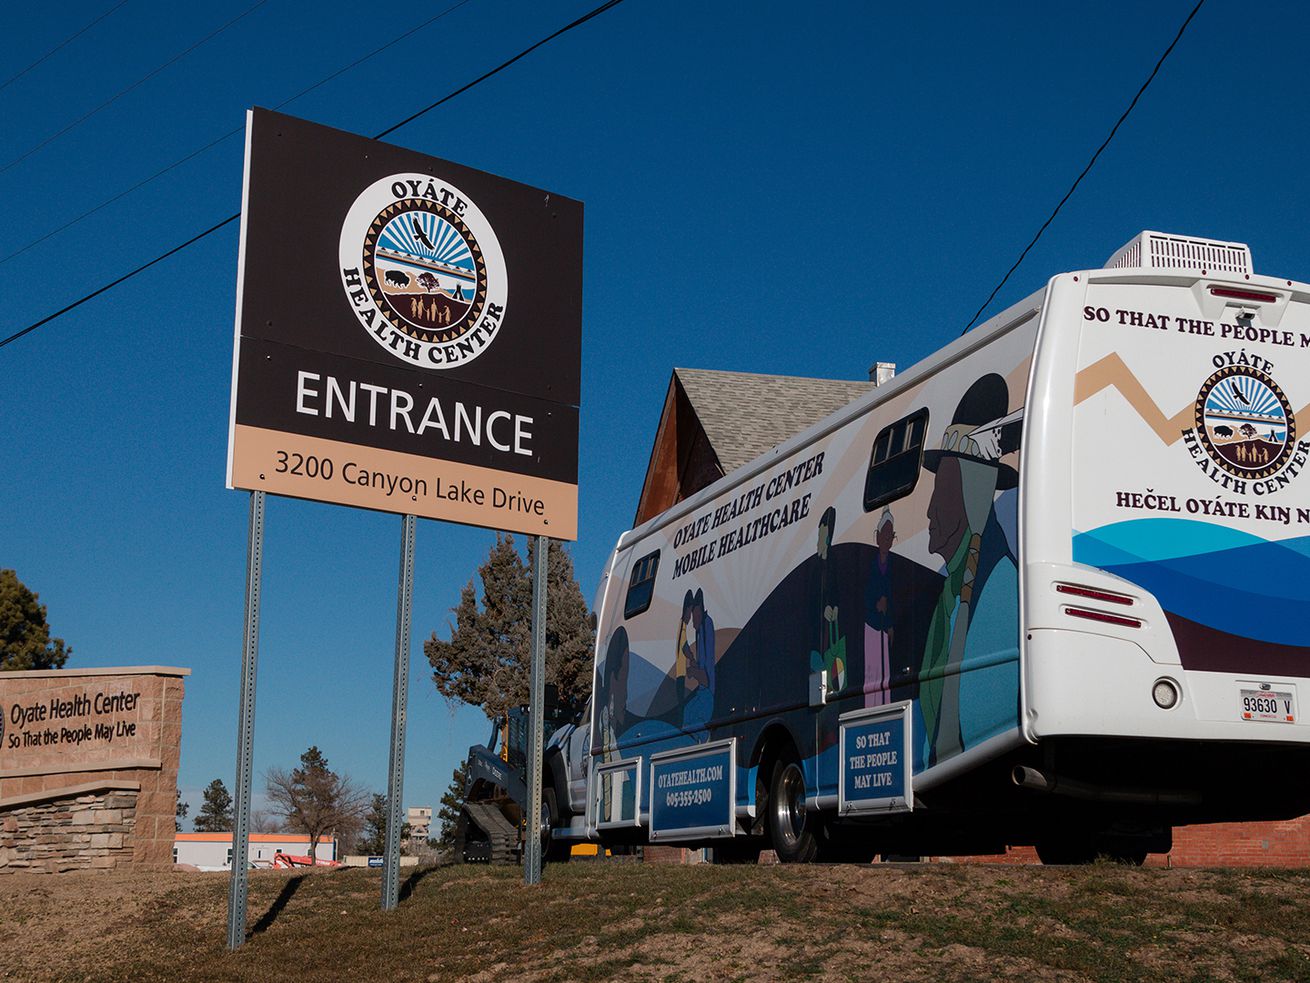 Several exterior signs for Oyate Health Center next to a mobile health care unit bearing the health center’s logo under a blue sky.